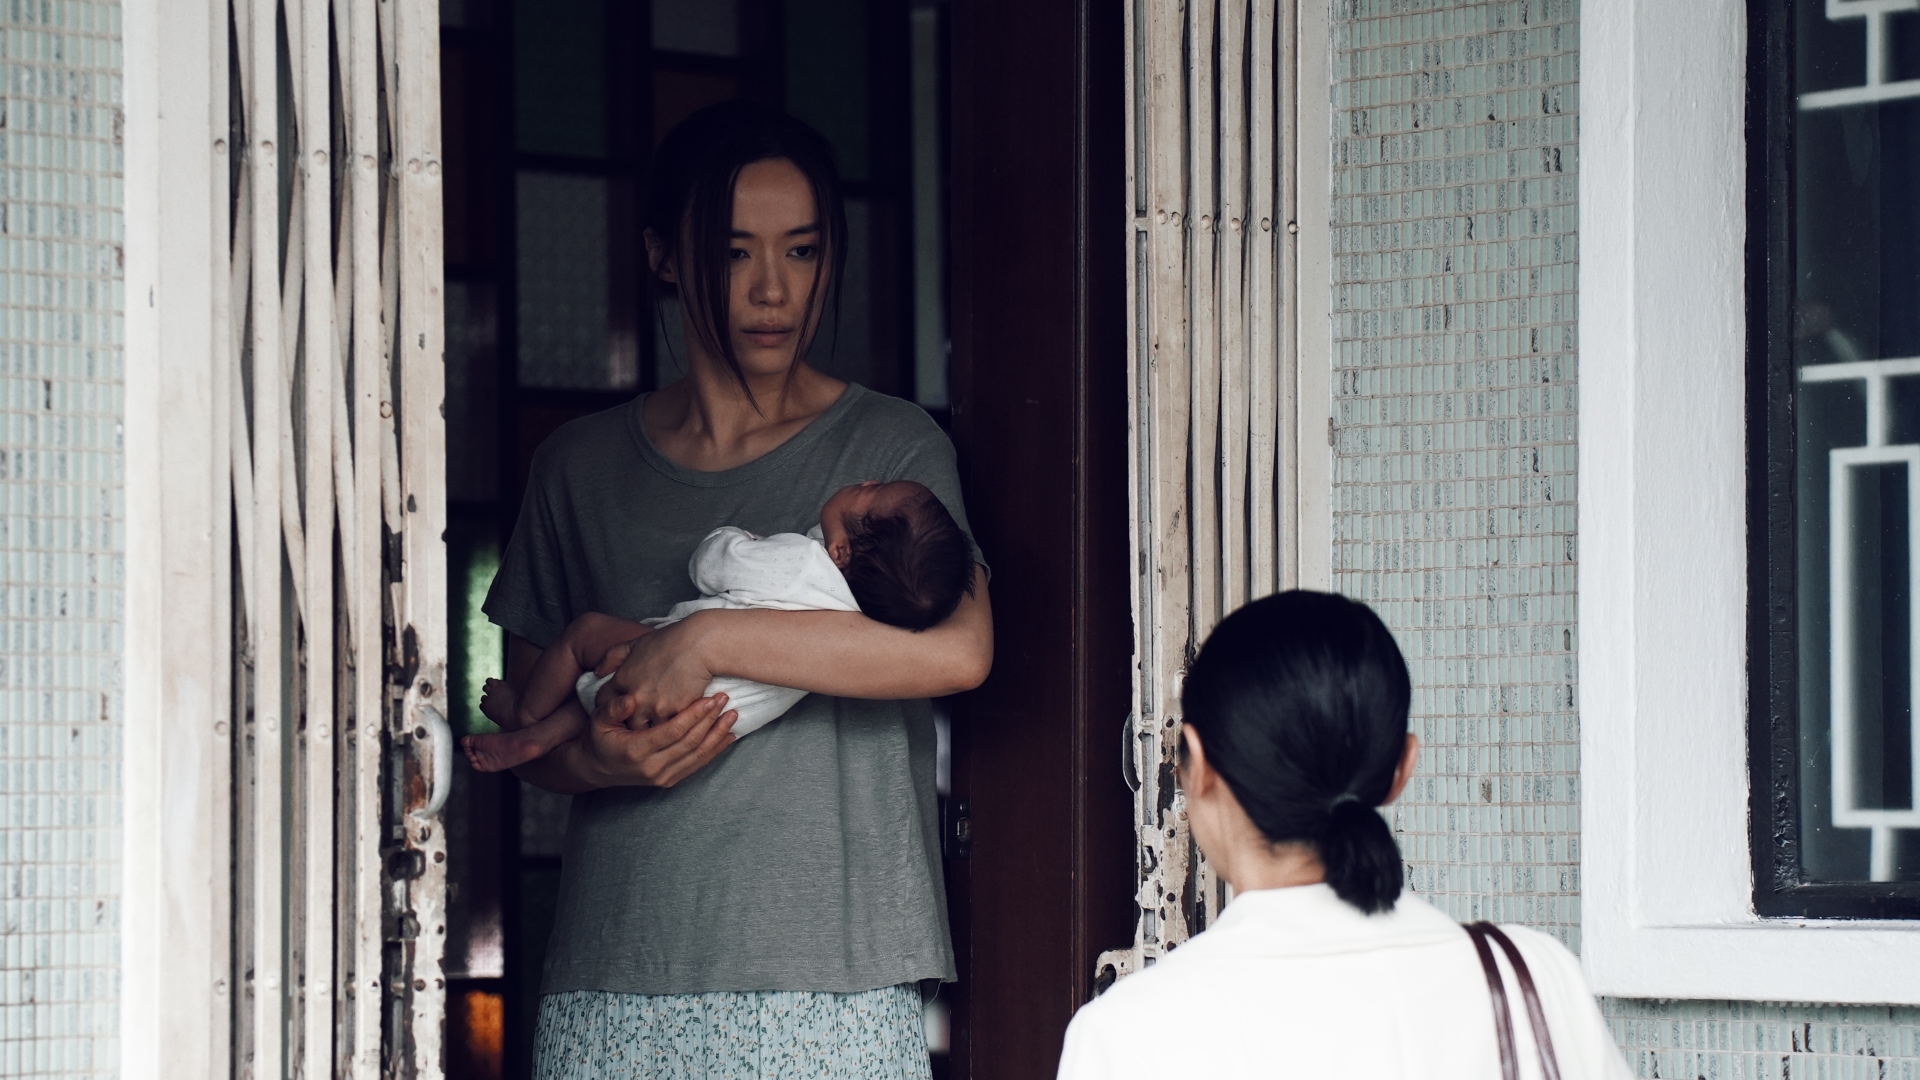 Rebecca lim and cynthia koh in confinement movie